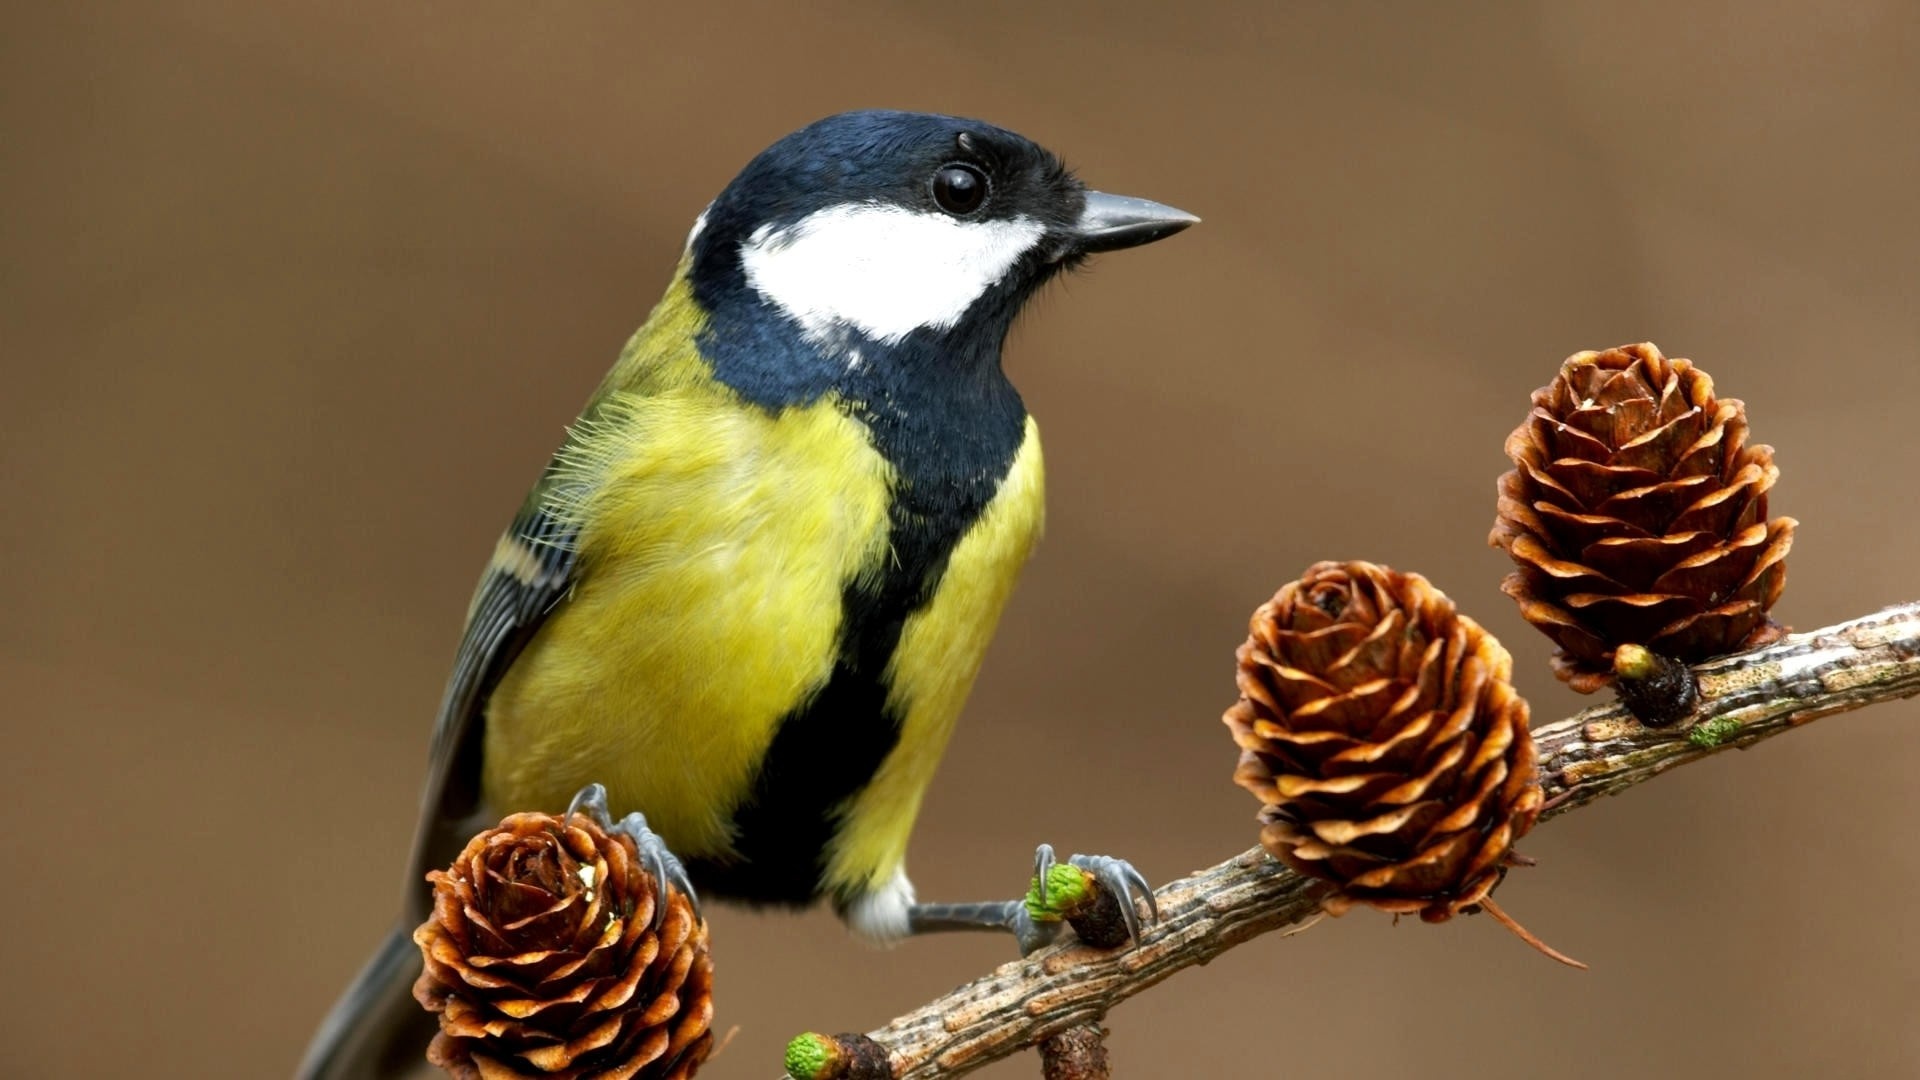 Great Tit, Parus major, Chirpy Charm, Feathered Personality, 1920x1080 Full HD Desktop